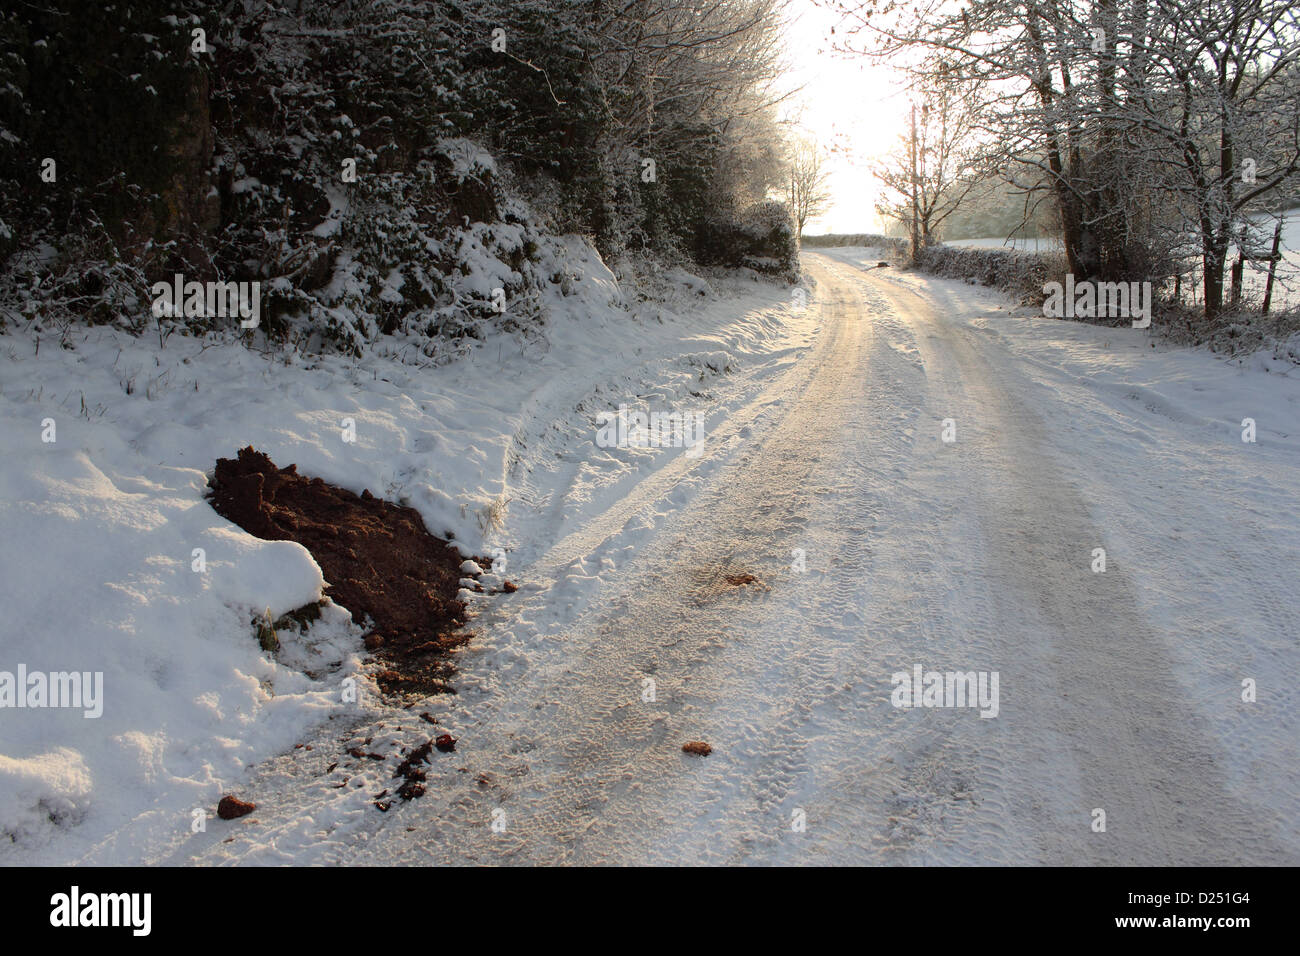 Grit and salt heap left on roadside by council in rural area during snowy conditions, North Wales, december Stock Photo